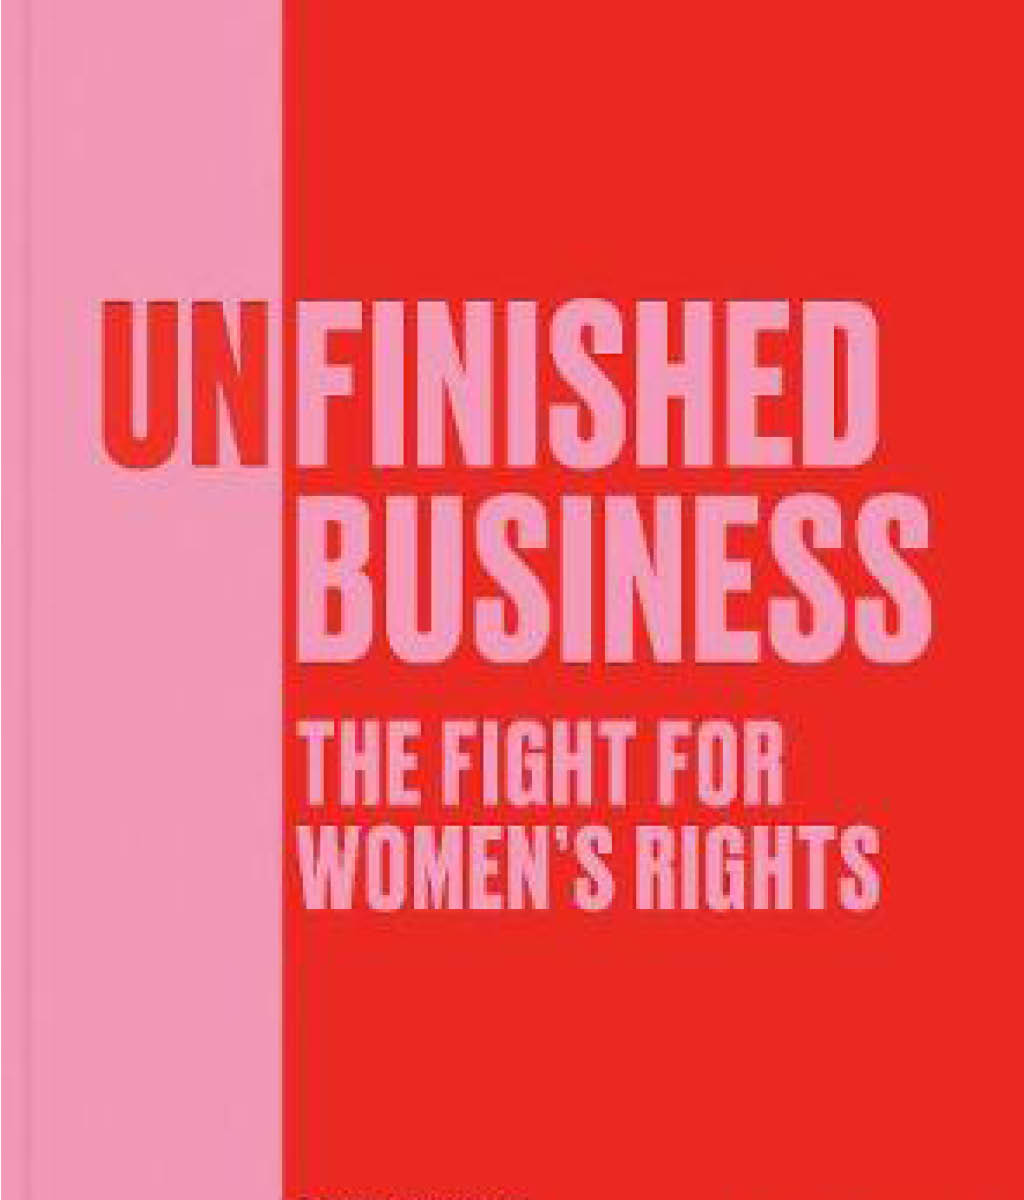 Unfinished Business by Polly Russell and Margaretta Jolly